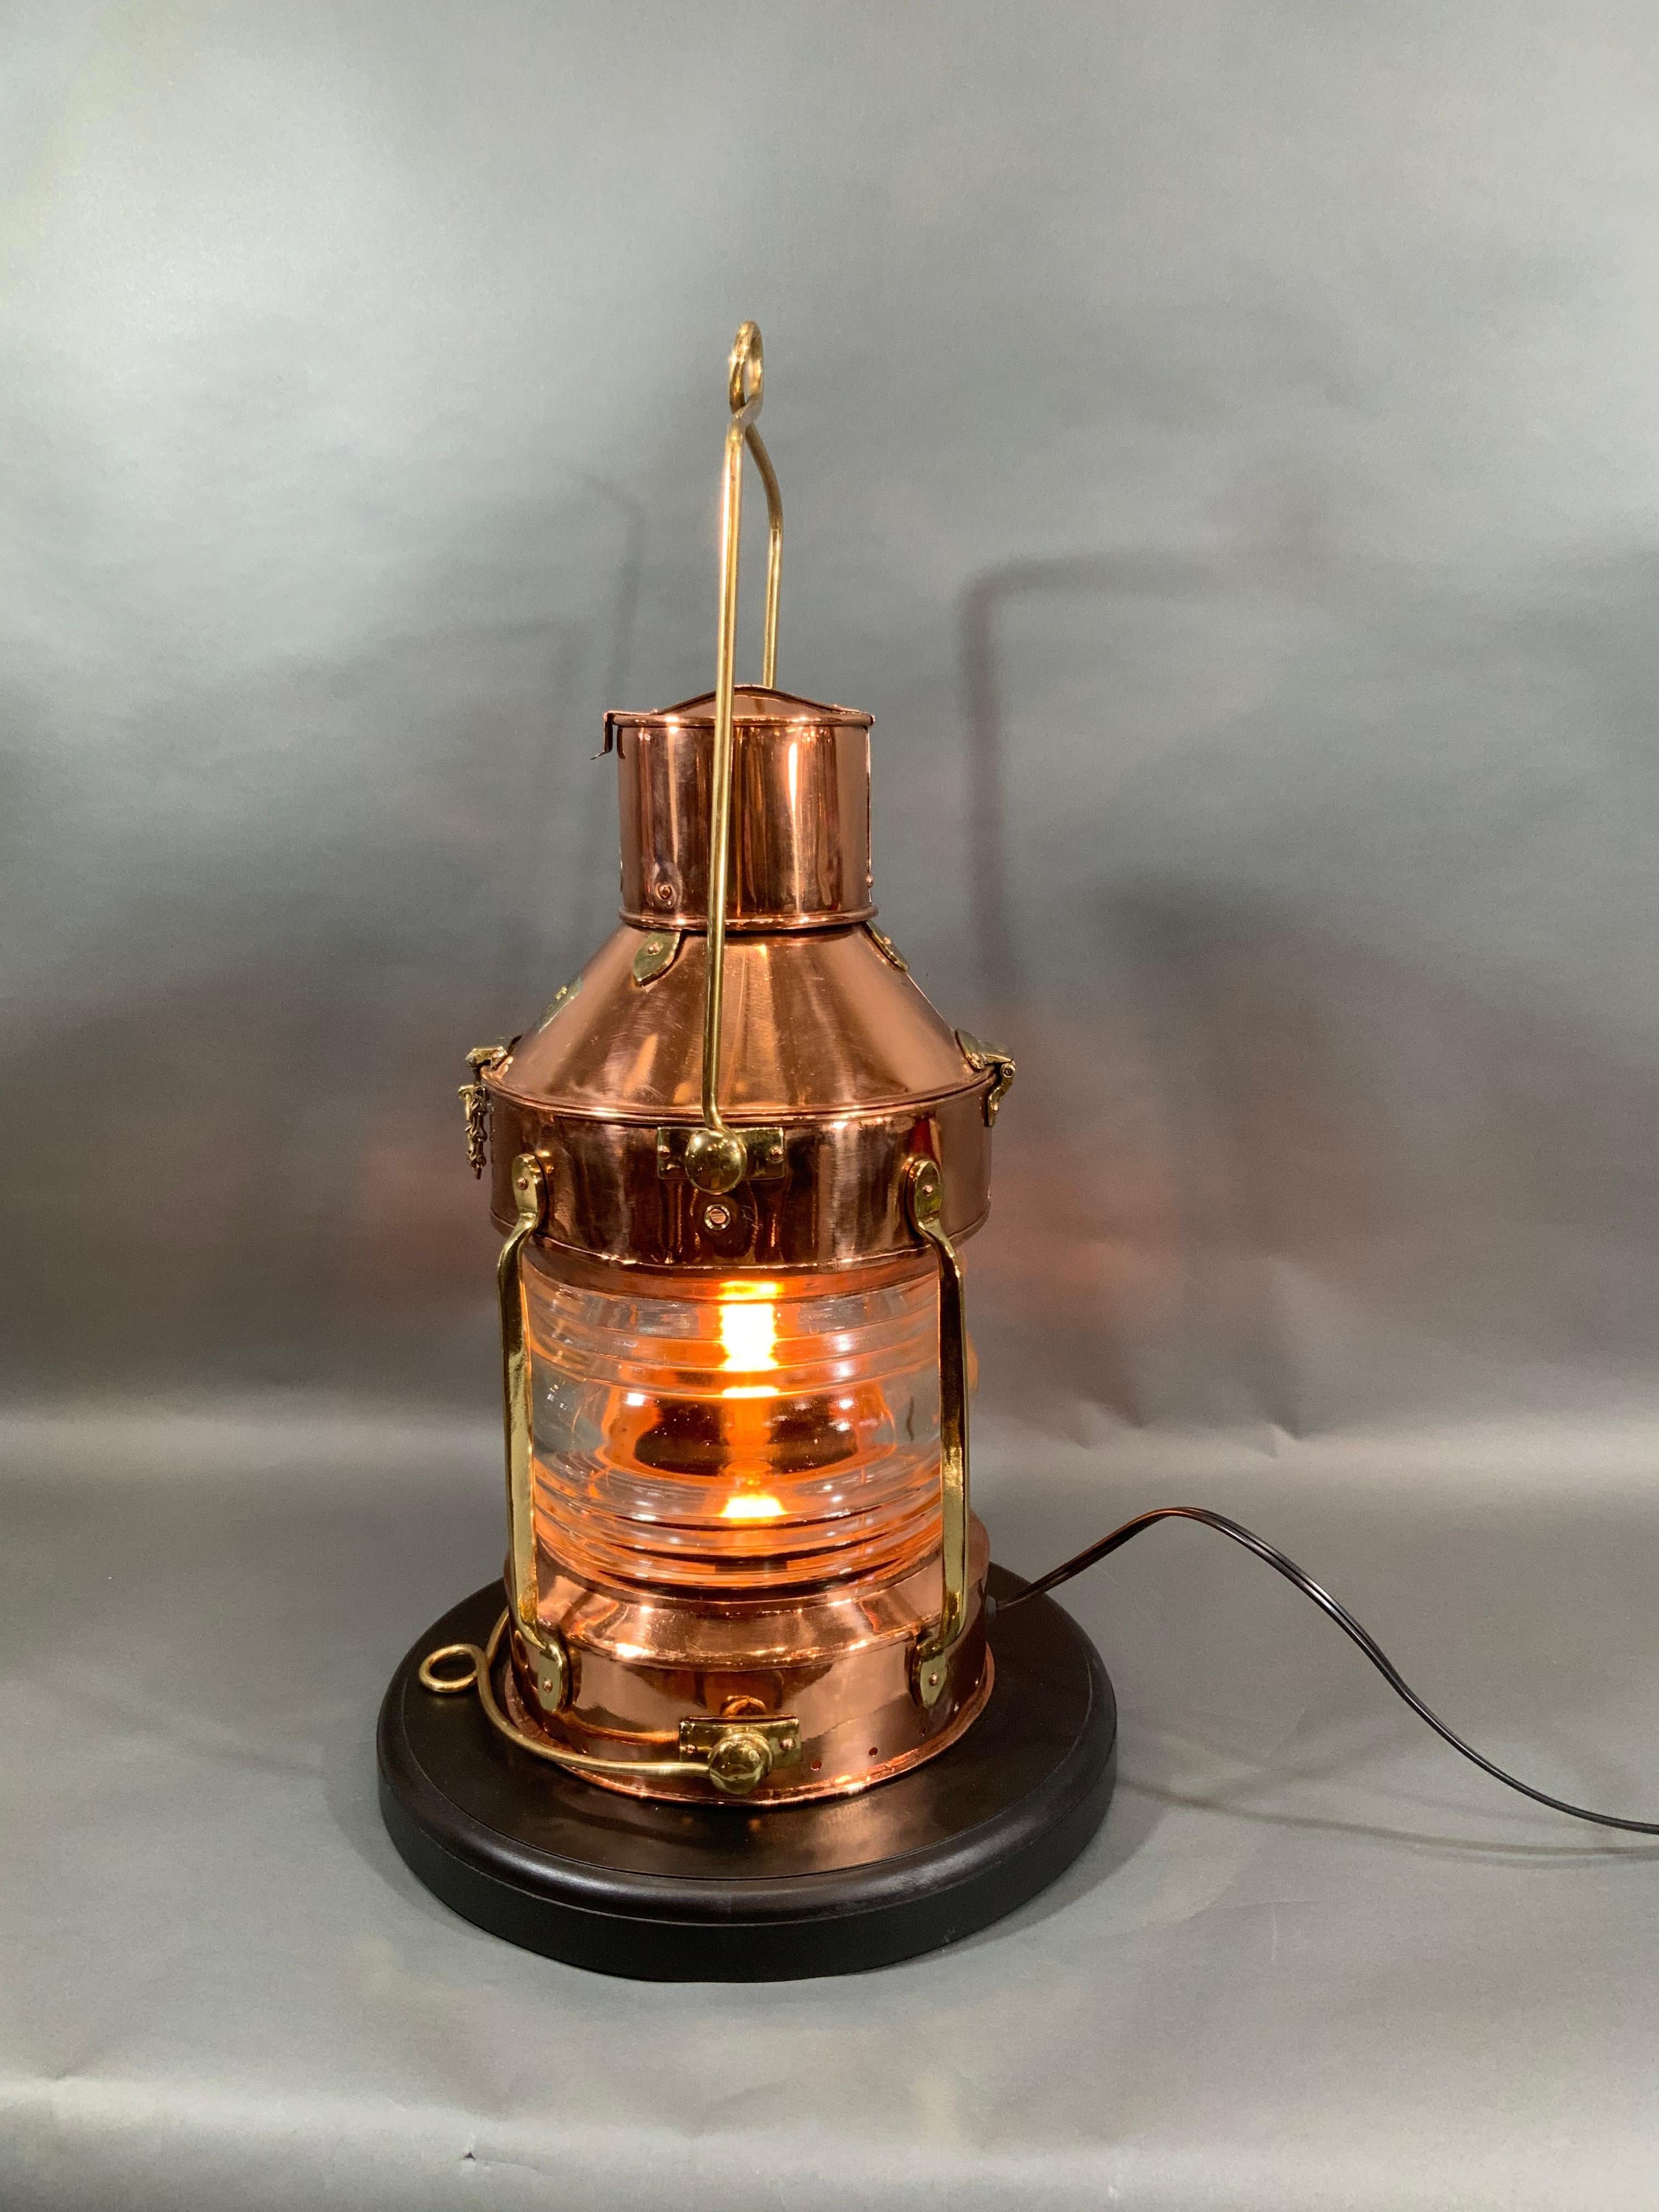 Antique copper and brass ship's anchor lantern with meticulously polished and lacquered finish. Wired for home use. Fitted with a glass Fresnel lens. Brass makers badges from R.C. Murray 37 Cavendish St, Glasgow. Mounted to a thick mahogany base.